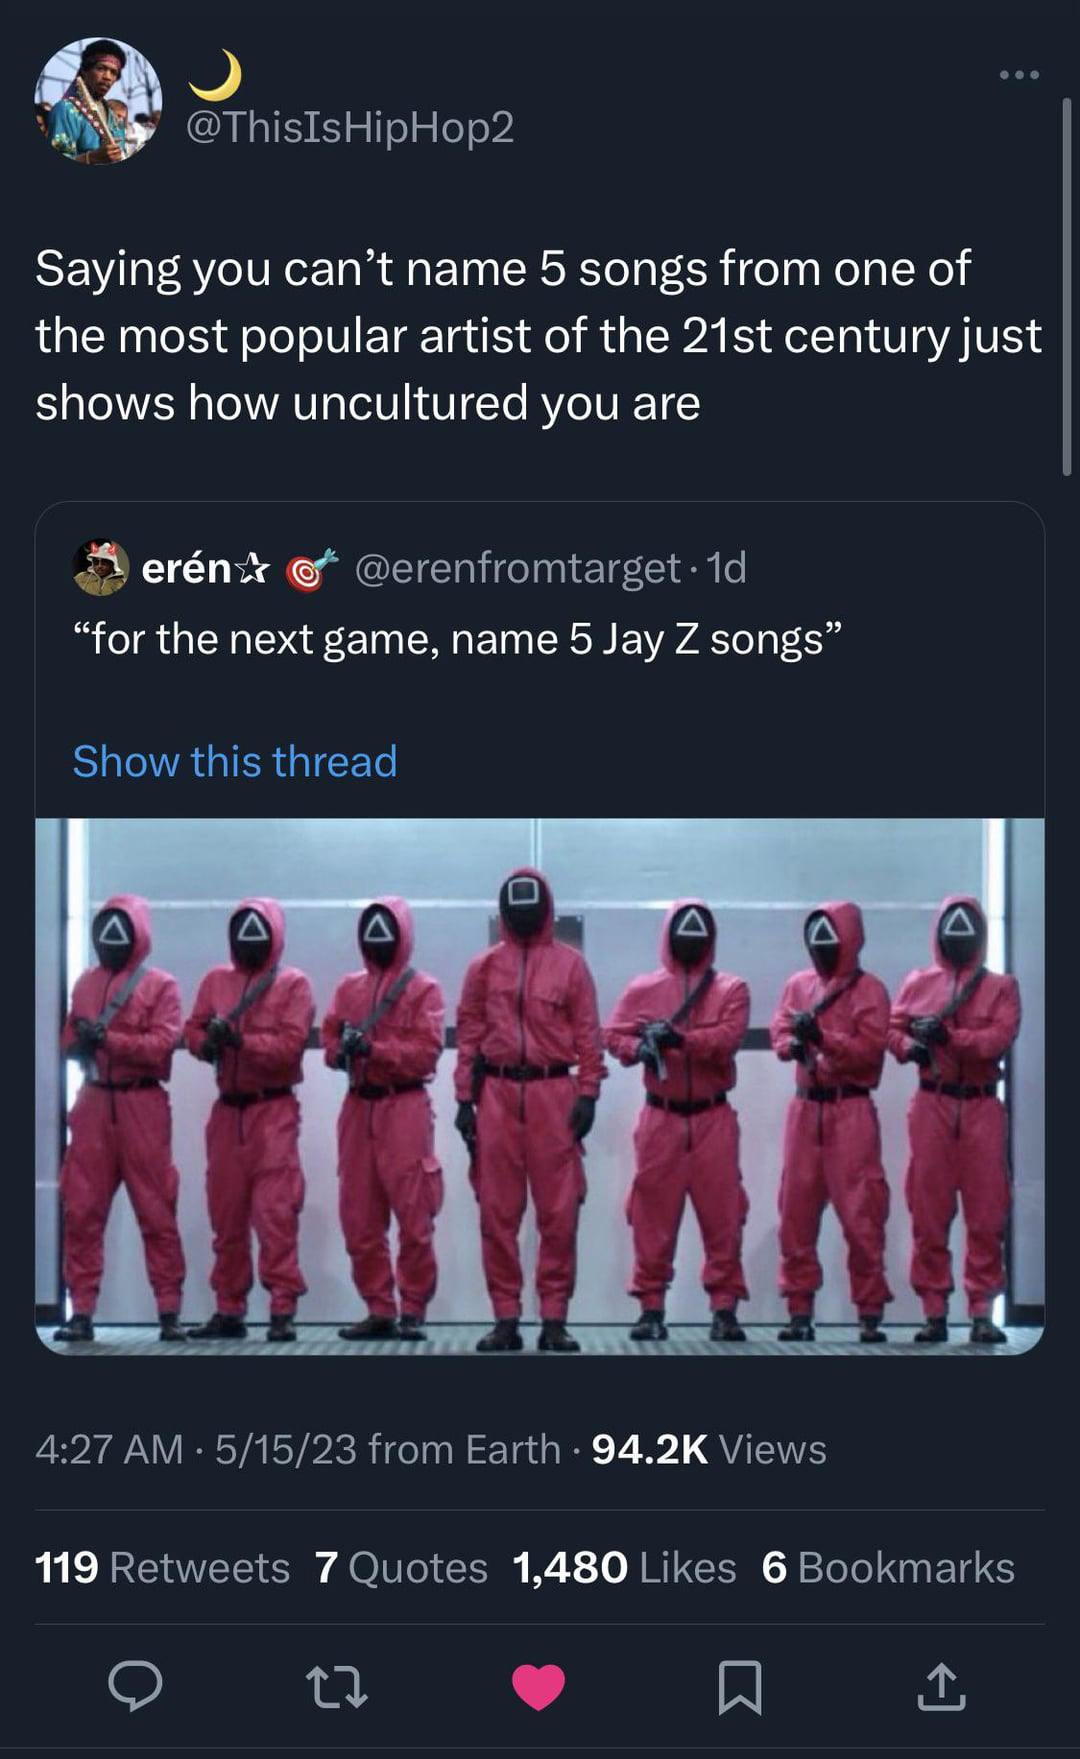 funny tweets - netflix squid game soldiers - Saying you can't name 5 songs from one of the most popular artist of the 21st century just shows how uncultured you are ern "for the next game, name 5 Jay Z songs" Show this thread 51523 from Earth Views 119 7 